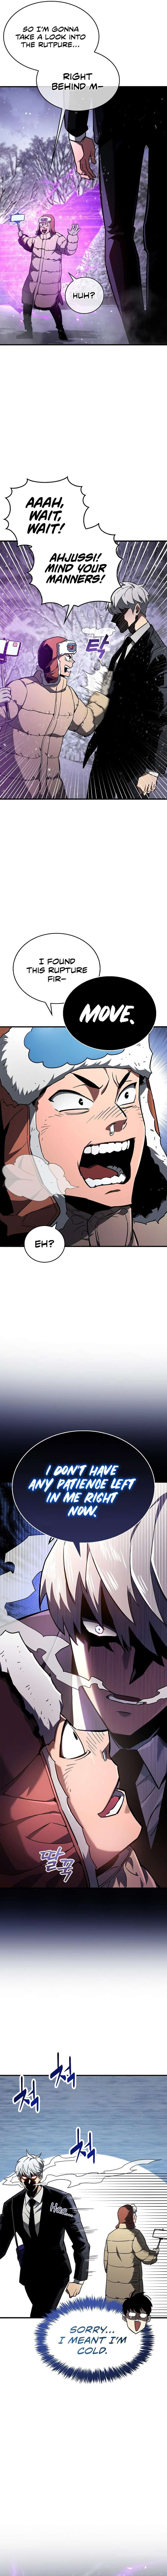 The Player Hides His Past Chapter 6 page 15